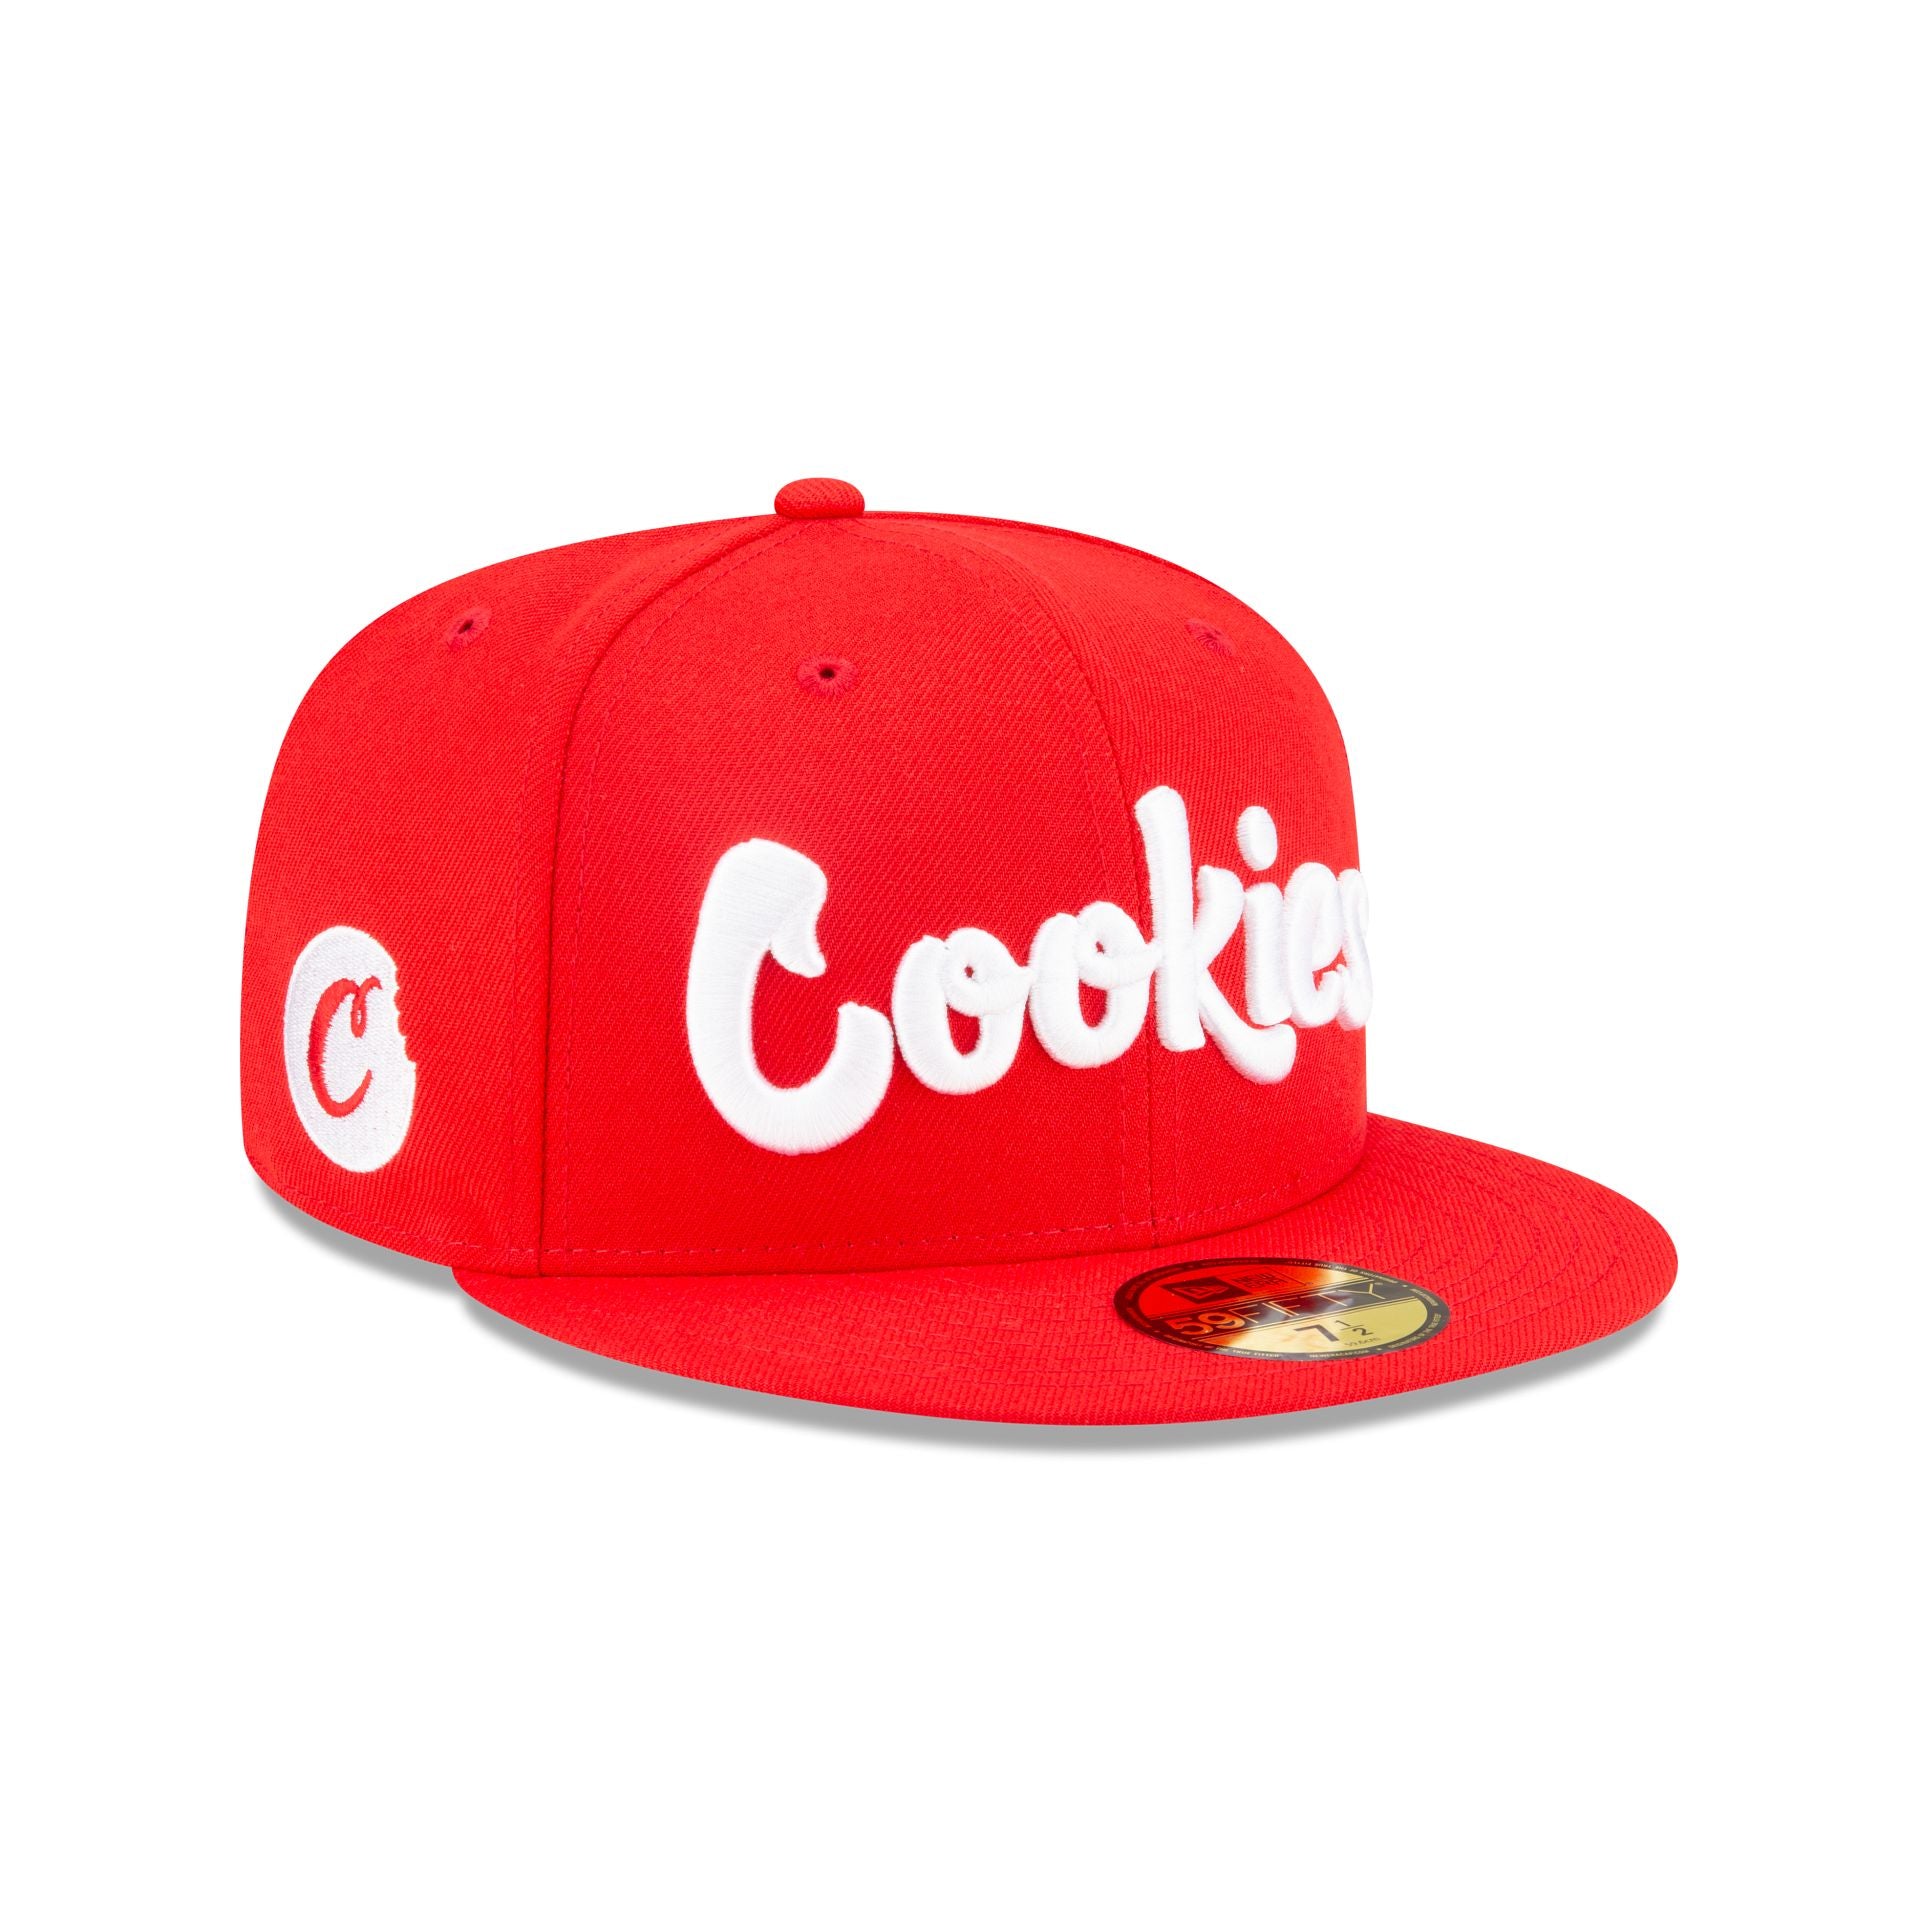 Cookies Red 59FIFTY Fitted Hat – New Era Cap